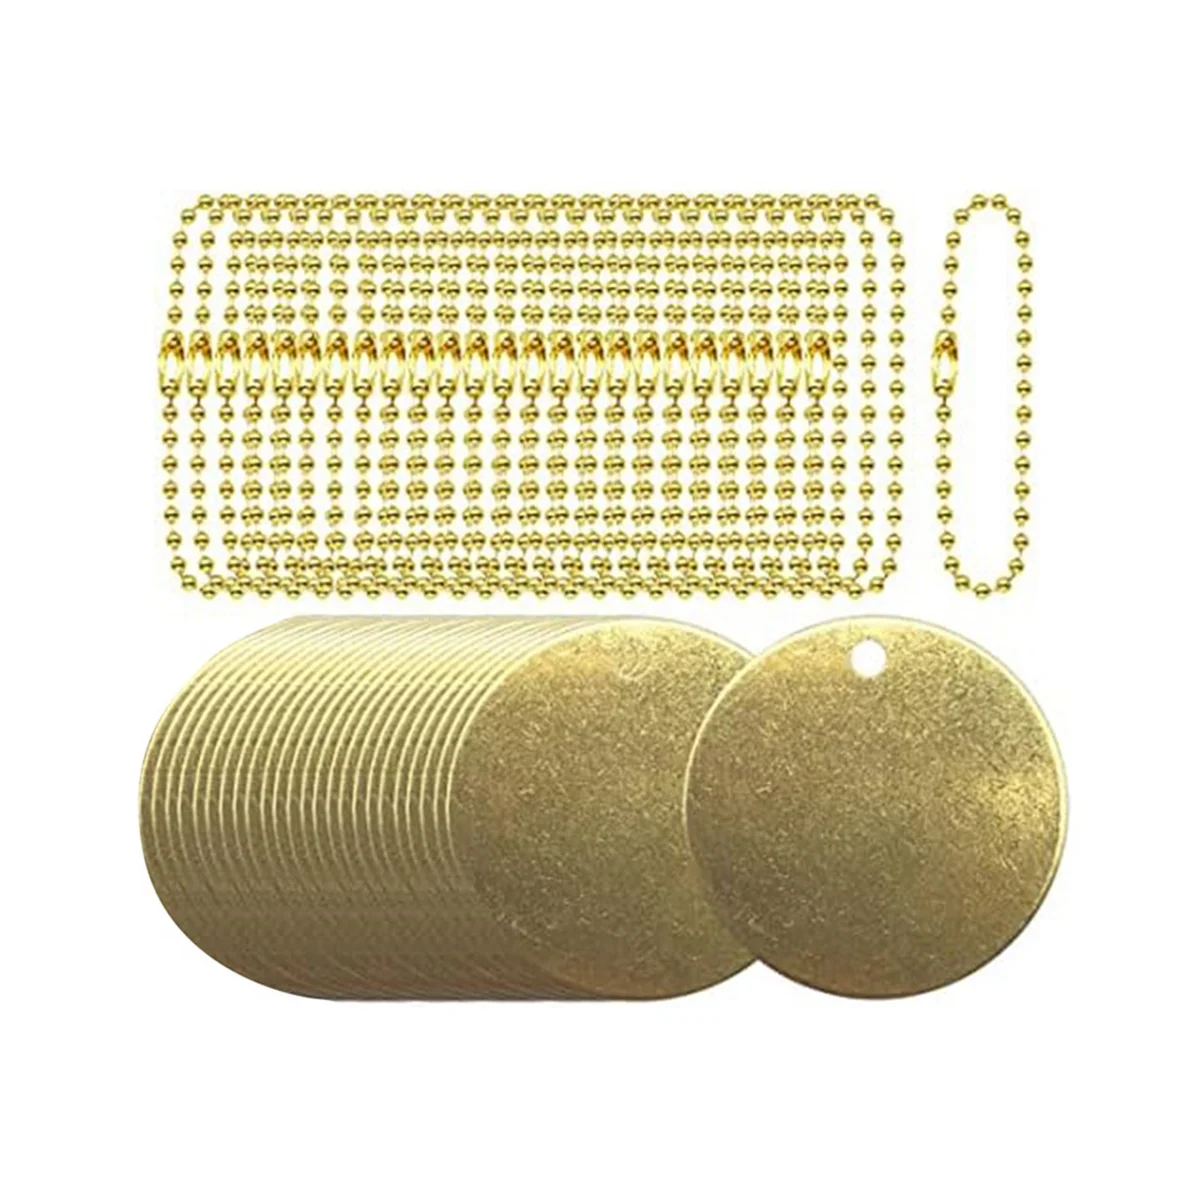 

25Pcs 1.5inch Brass Valve Tags Stamping Blank with Hole and 25Pcs 2.4mm Metal Ball Chains for Pipe Valves, Equipment